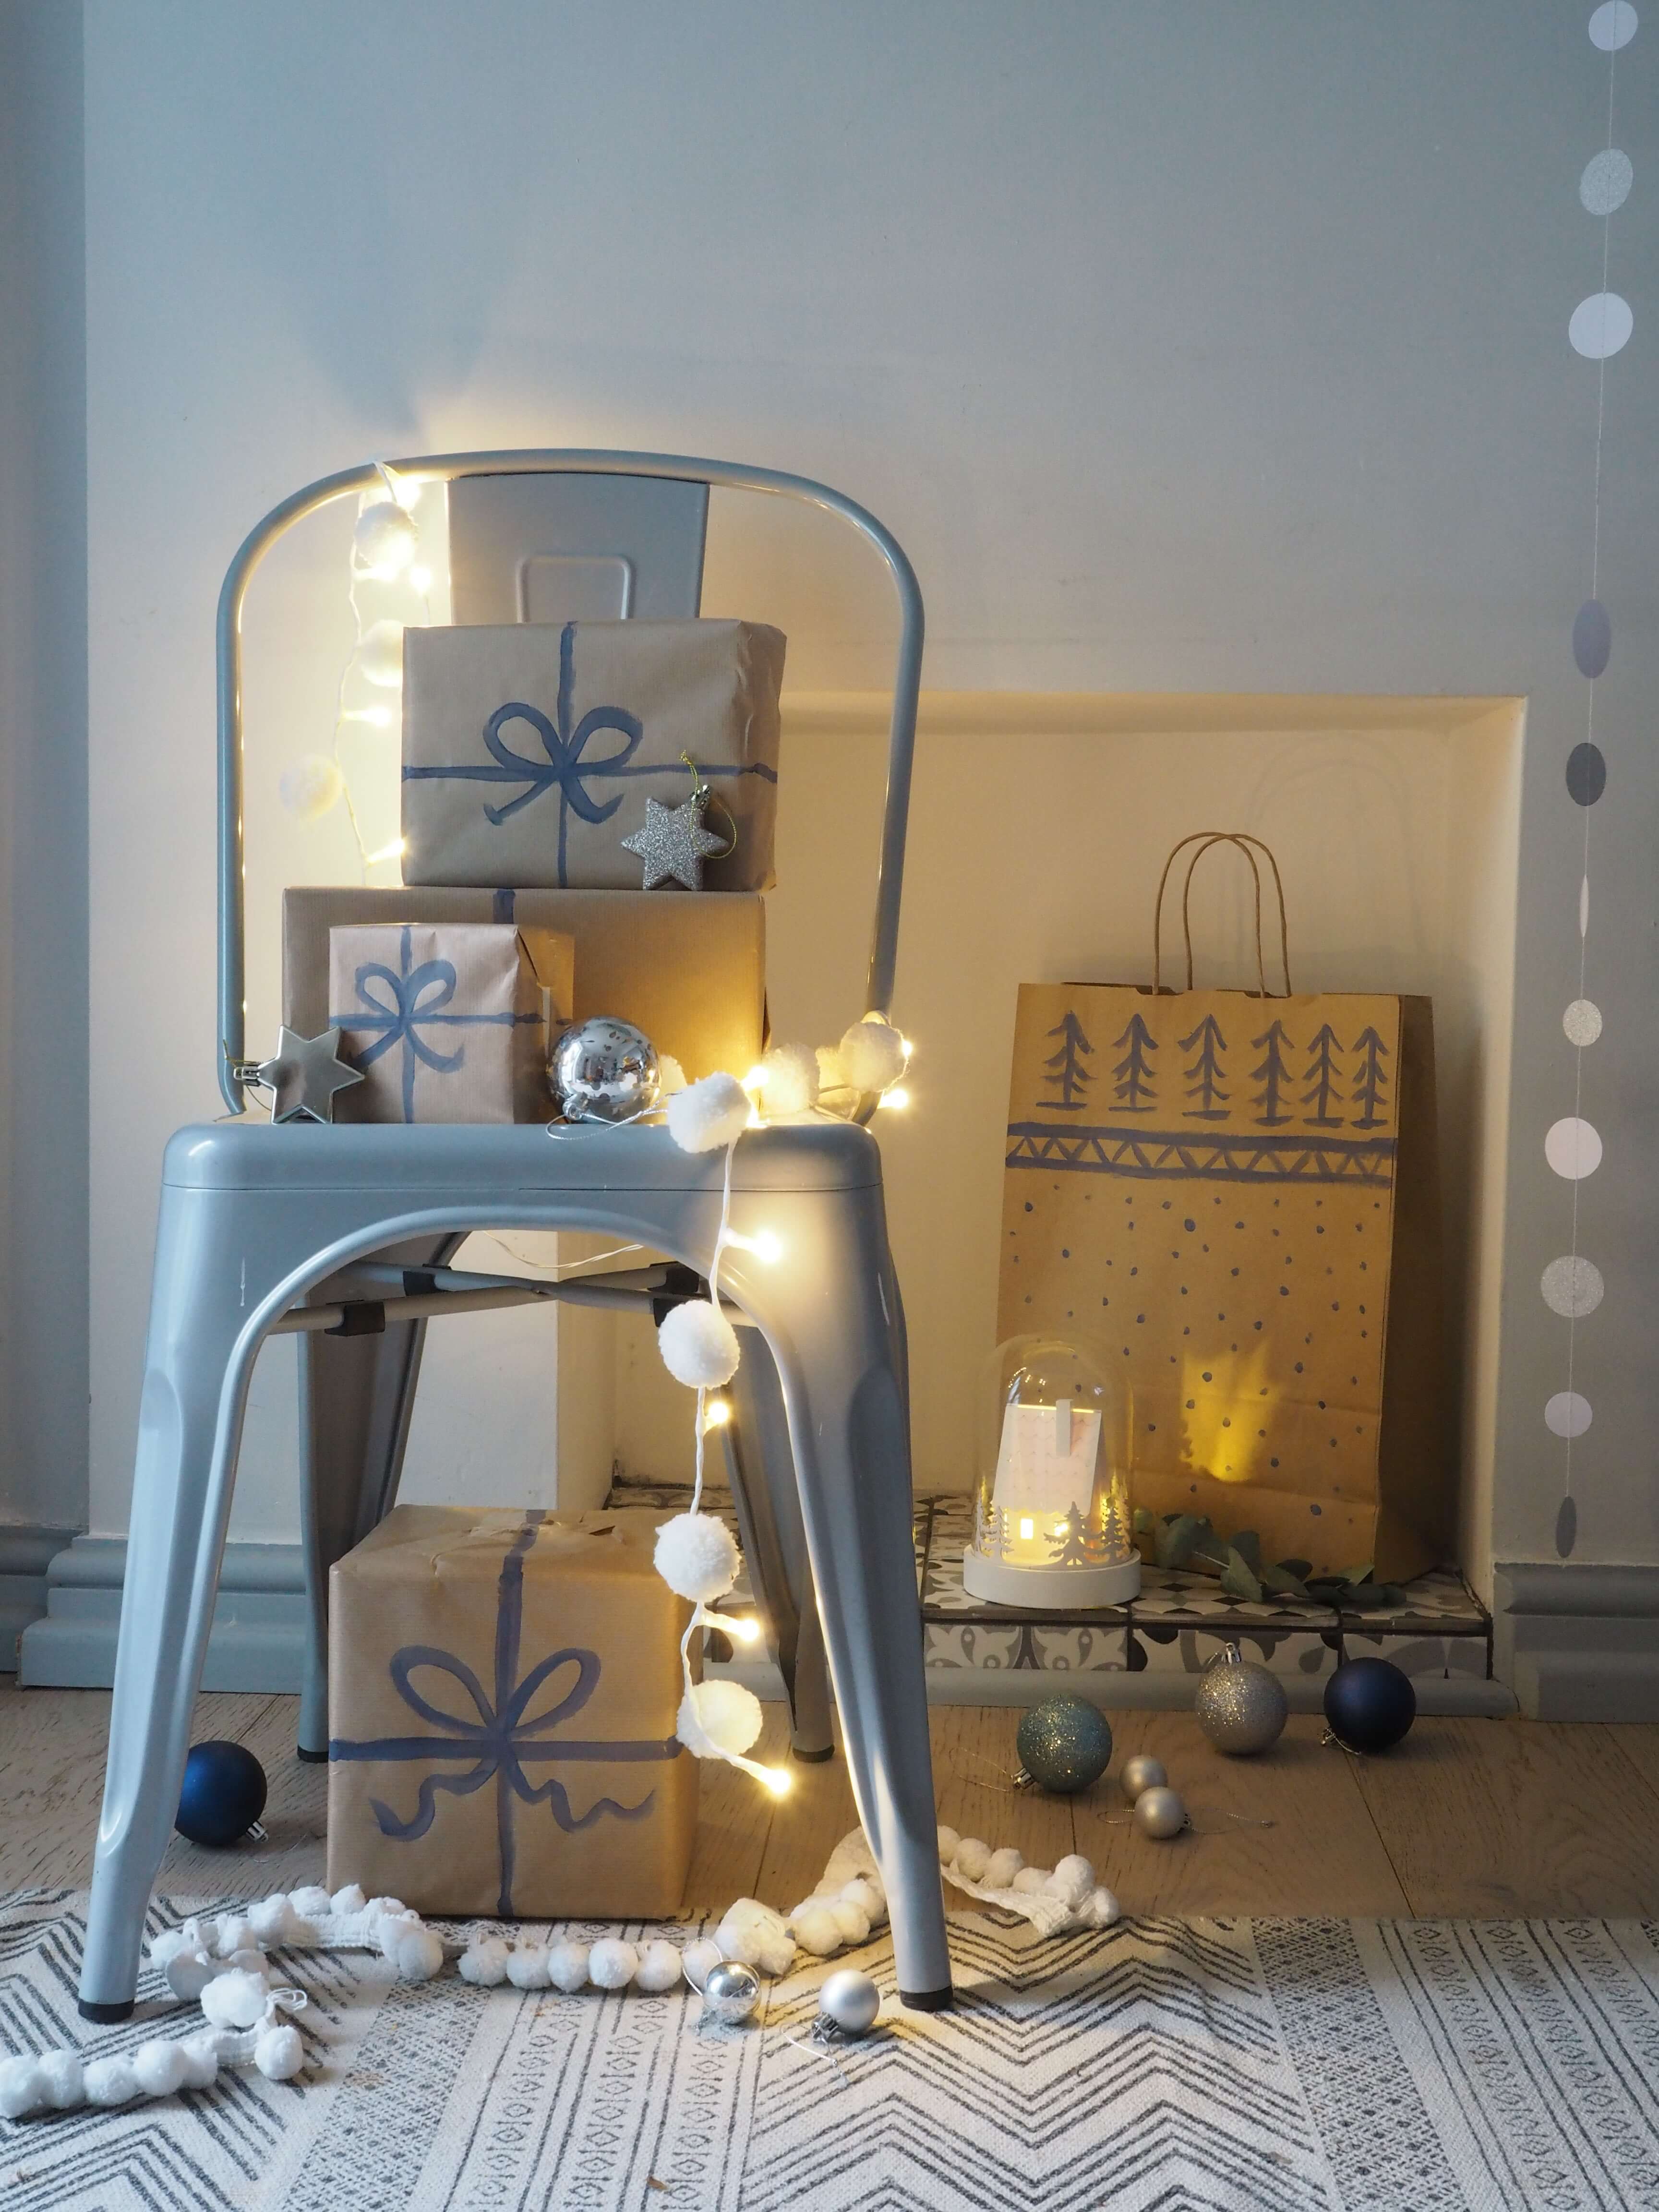 Why not try this easy DIY Christmas gift wrapping idea by Interior Stylist Maxine Brady from lifestyle blog www.welovehomeblog.com